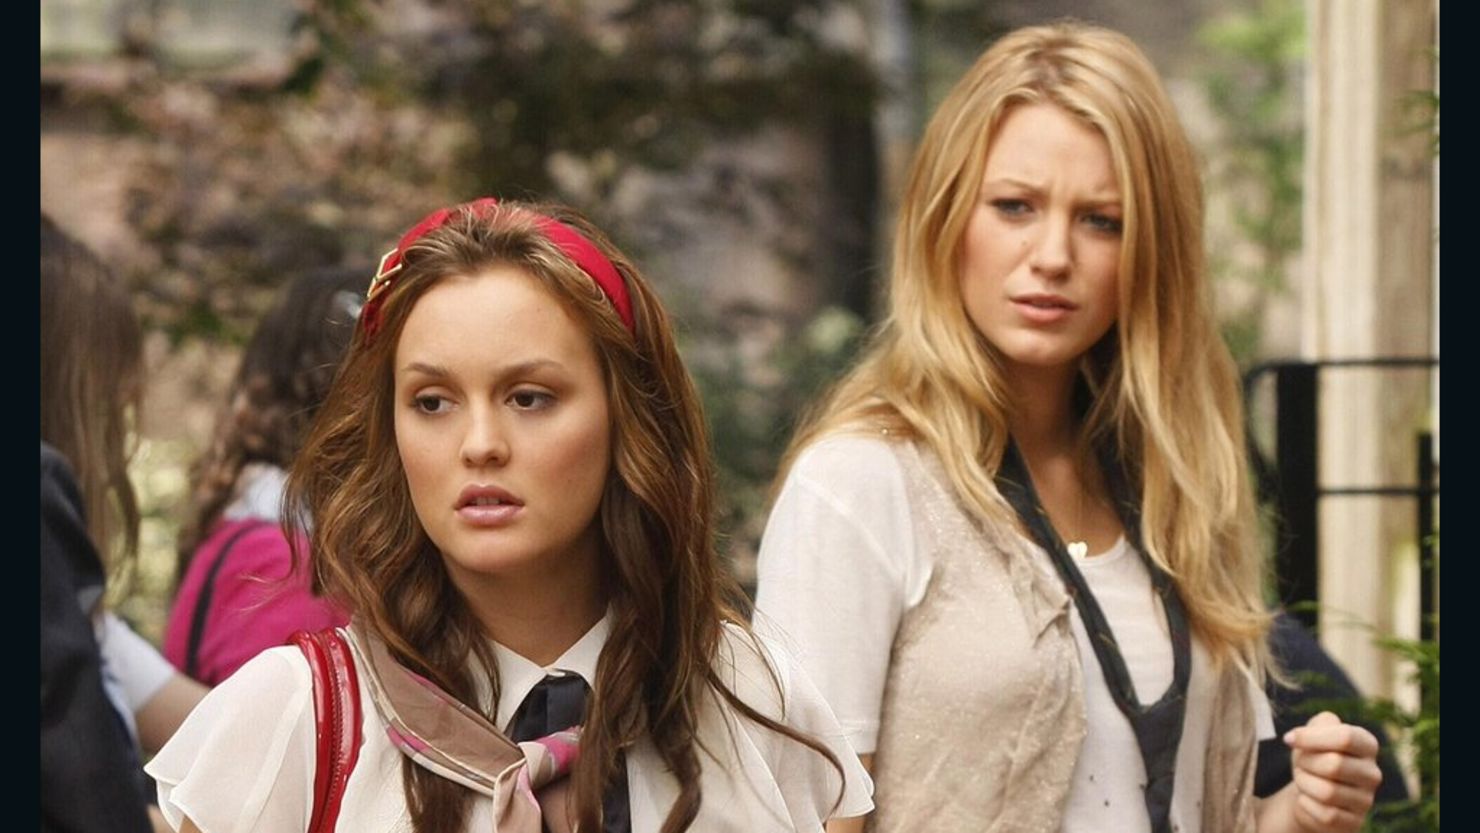 Gossip Girl' Season 3 Won't Be On HBO Max, But There's Still Hope